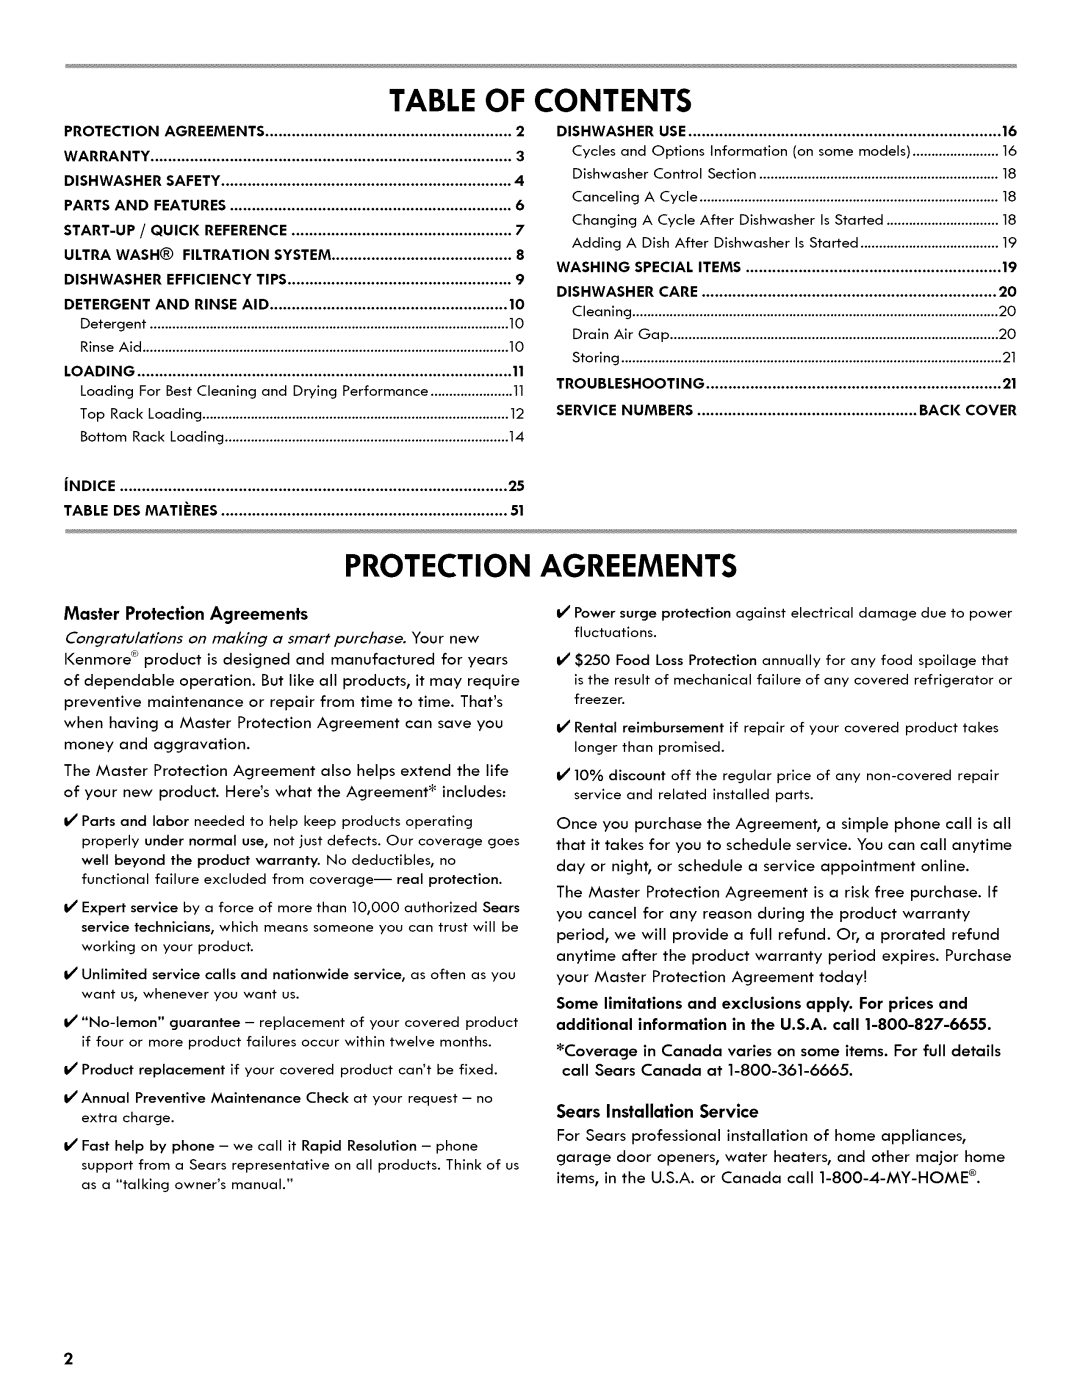 Kenmore 665.1404 manual Table Of Contents, Protection, Agreements, Sears Installation Service 